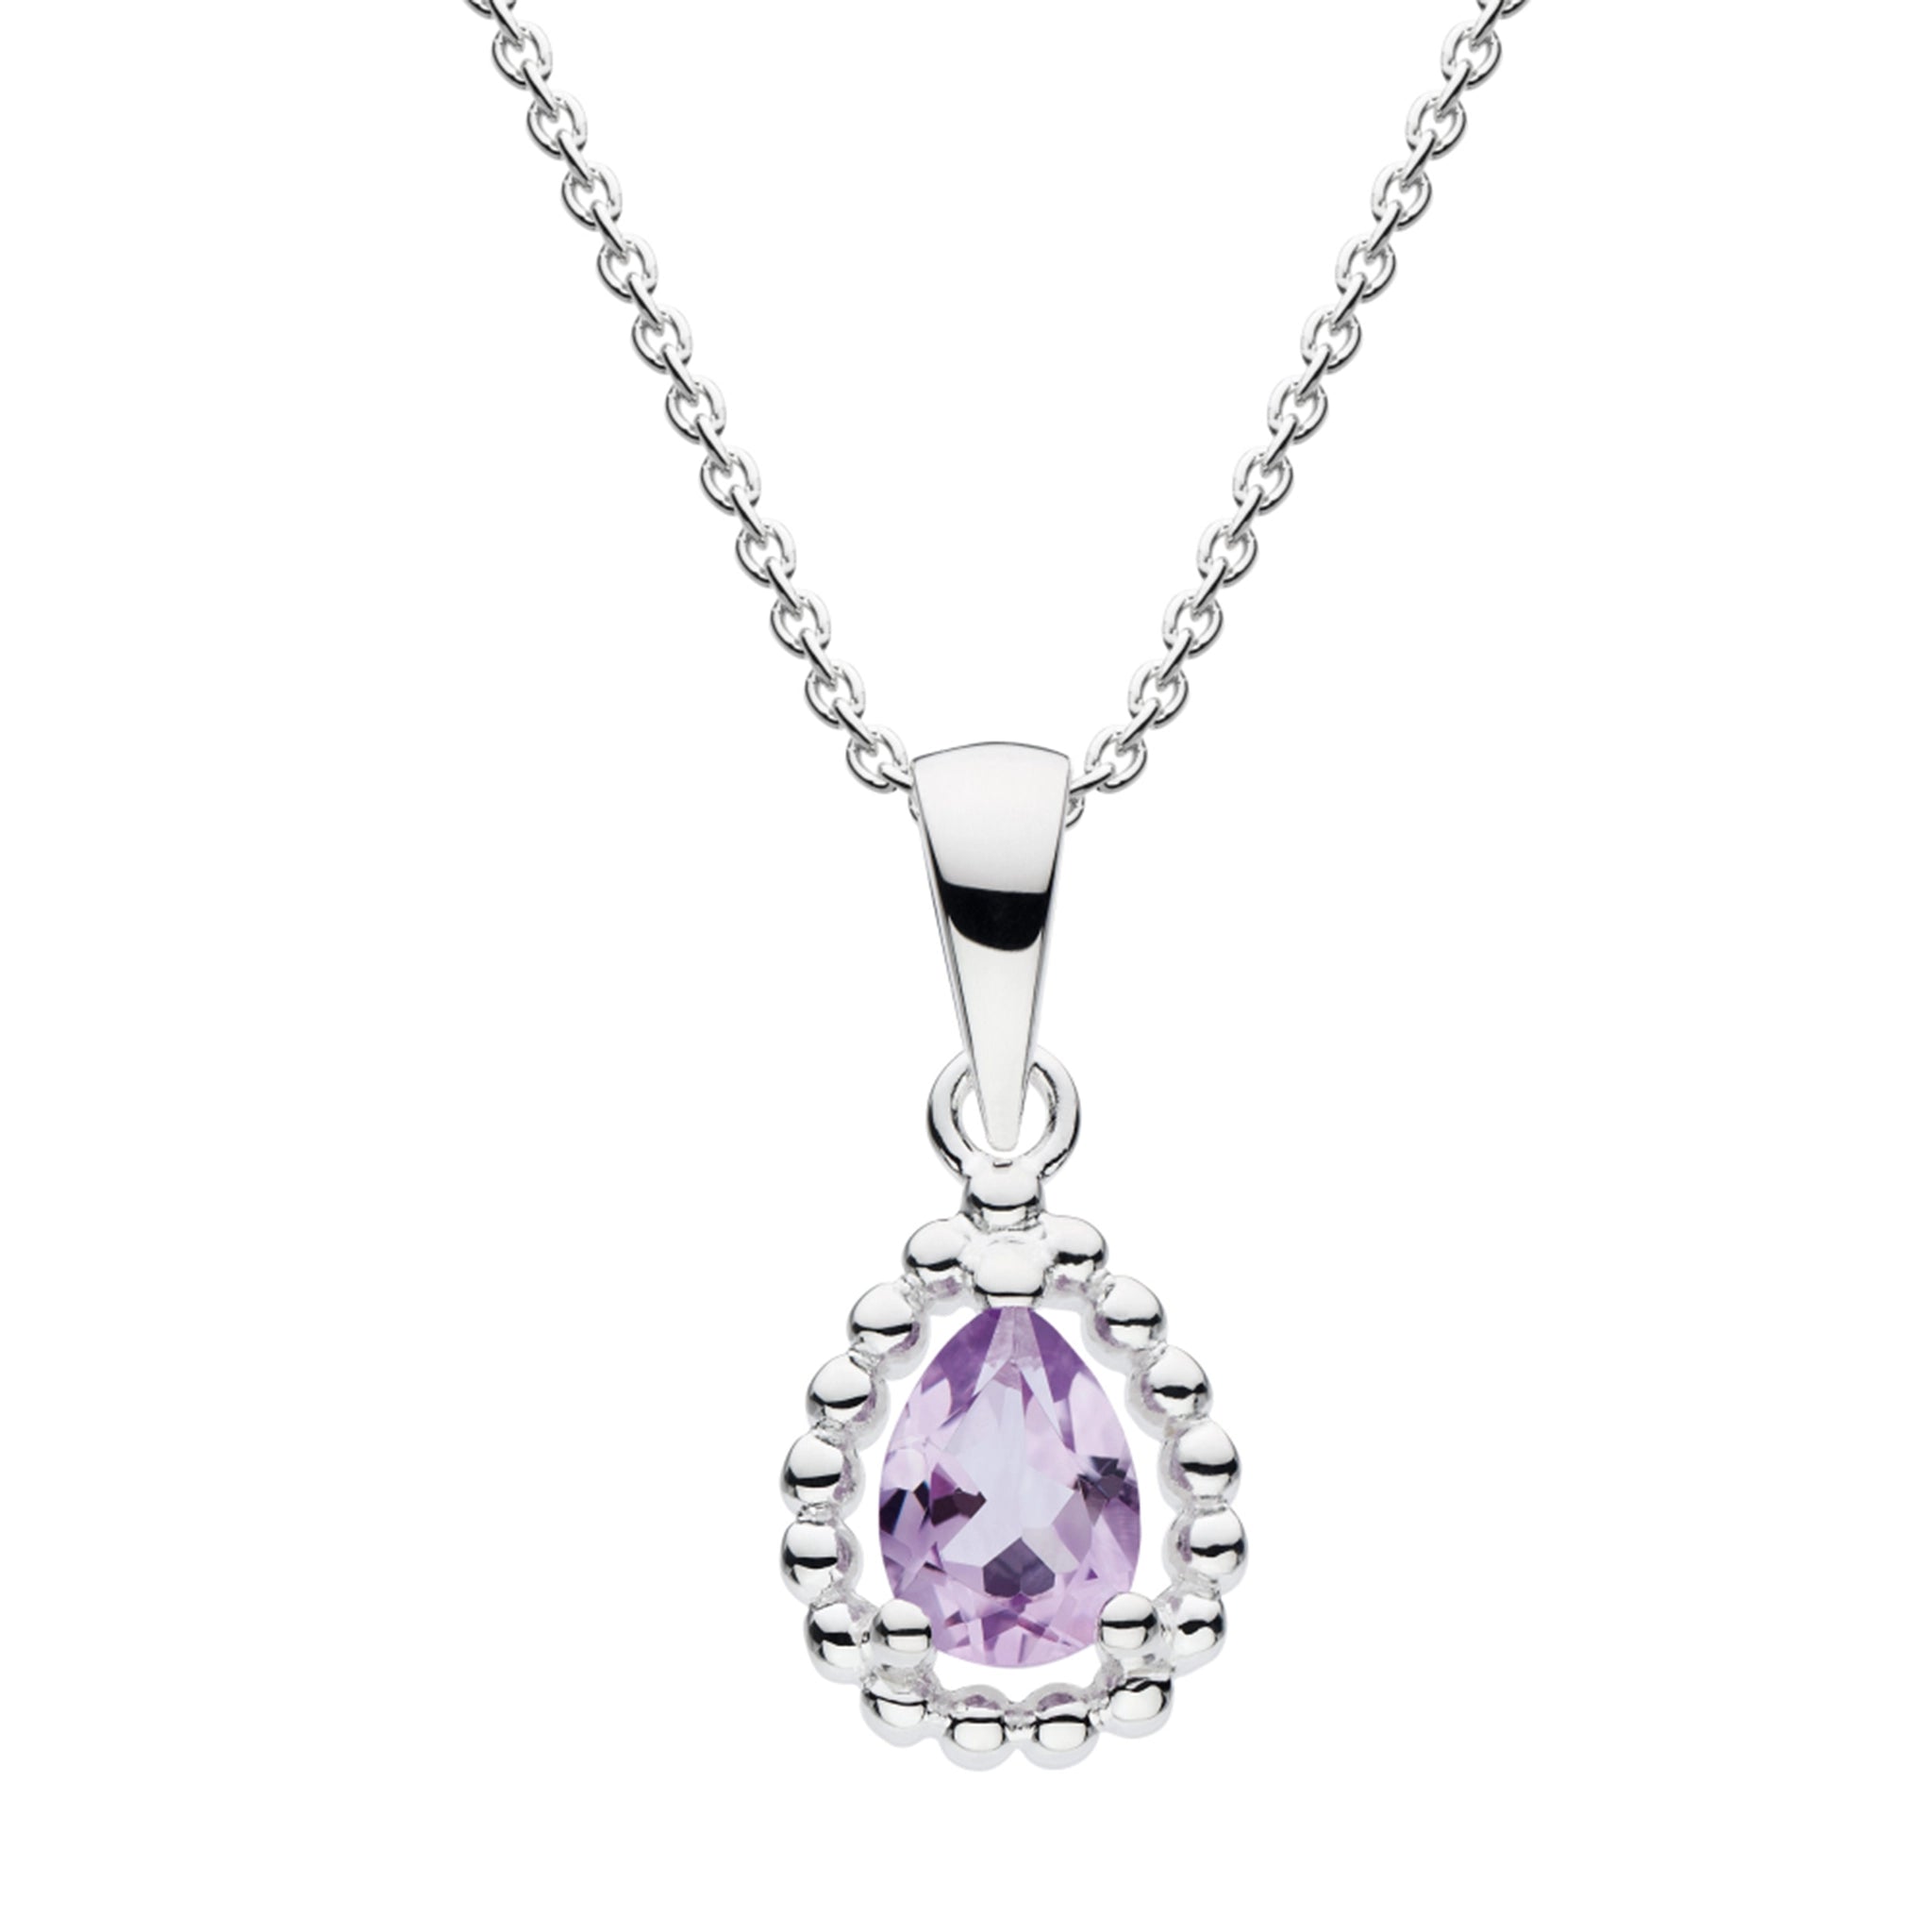 A faceted amethyst stone teardrop pendant with silver bead surround